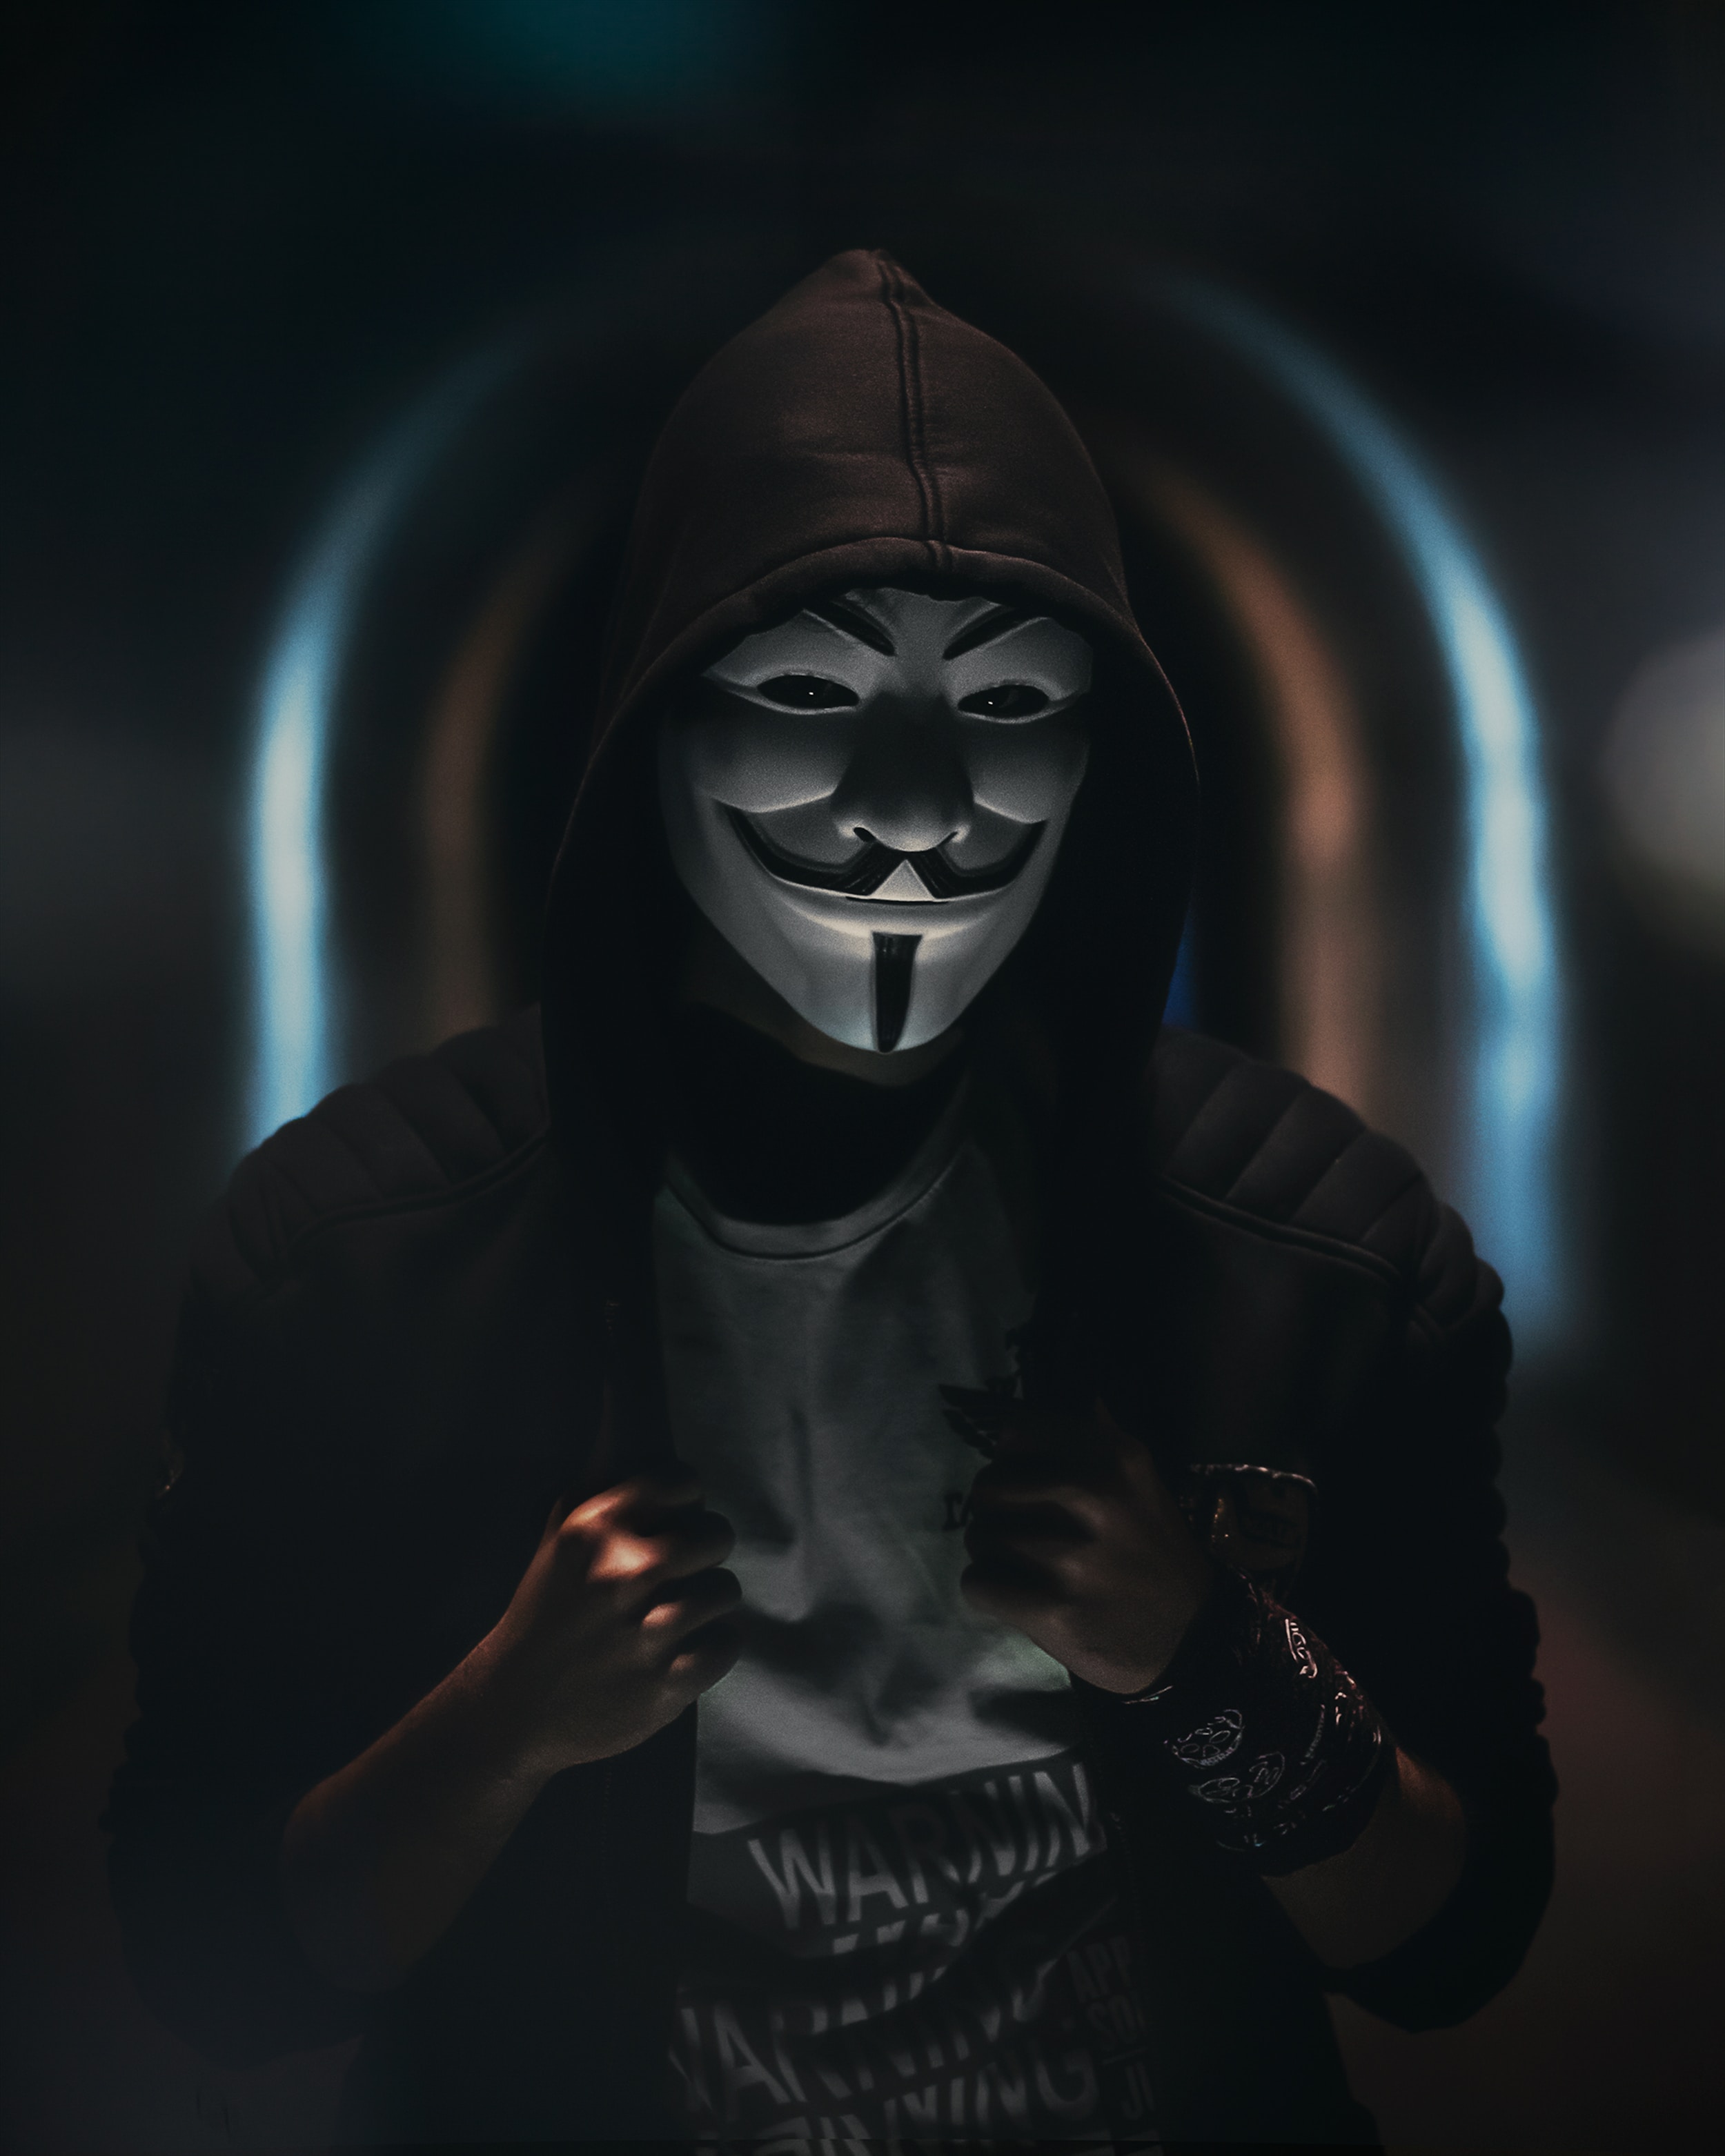 dark, anonymous, mask, hood, human, miscellanea, miscellaneous, person cell phone wallpapers